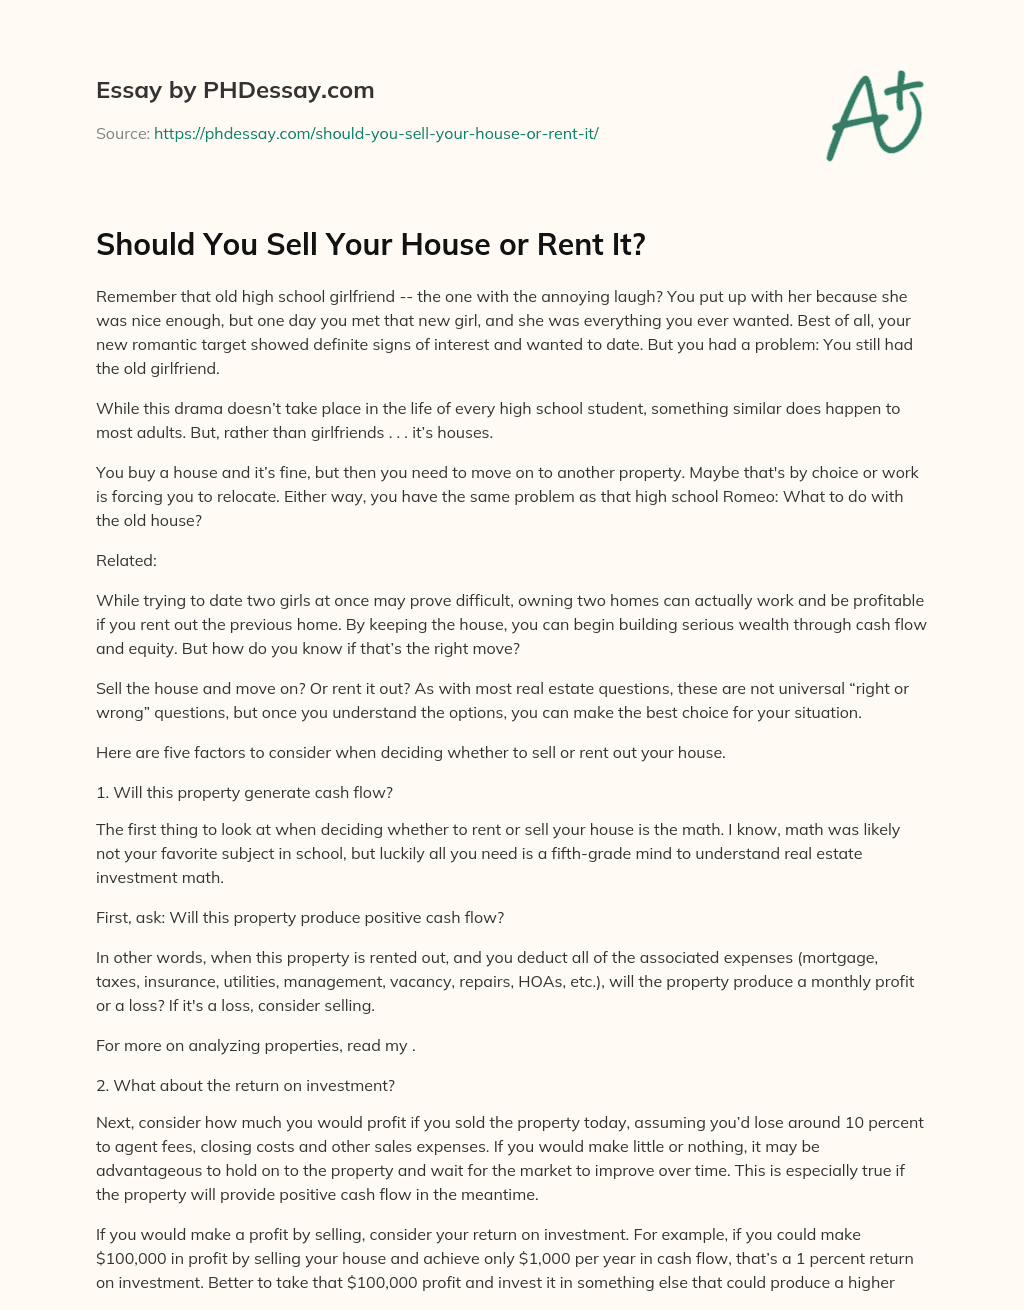 Should You Sell Your House or Rent It? essay